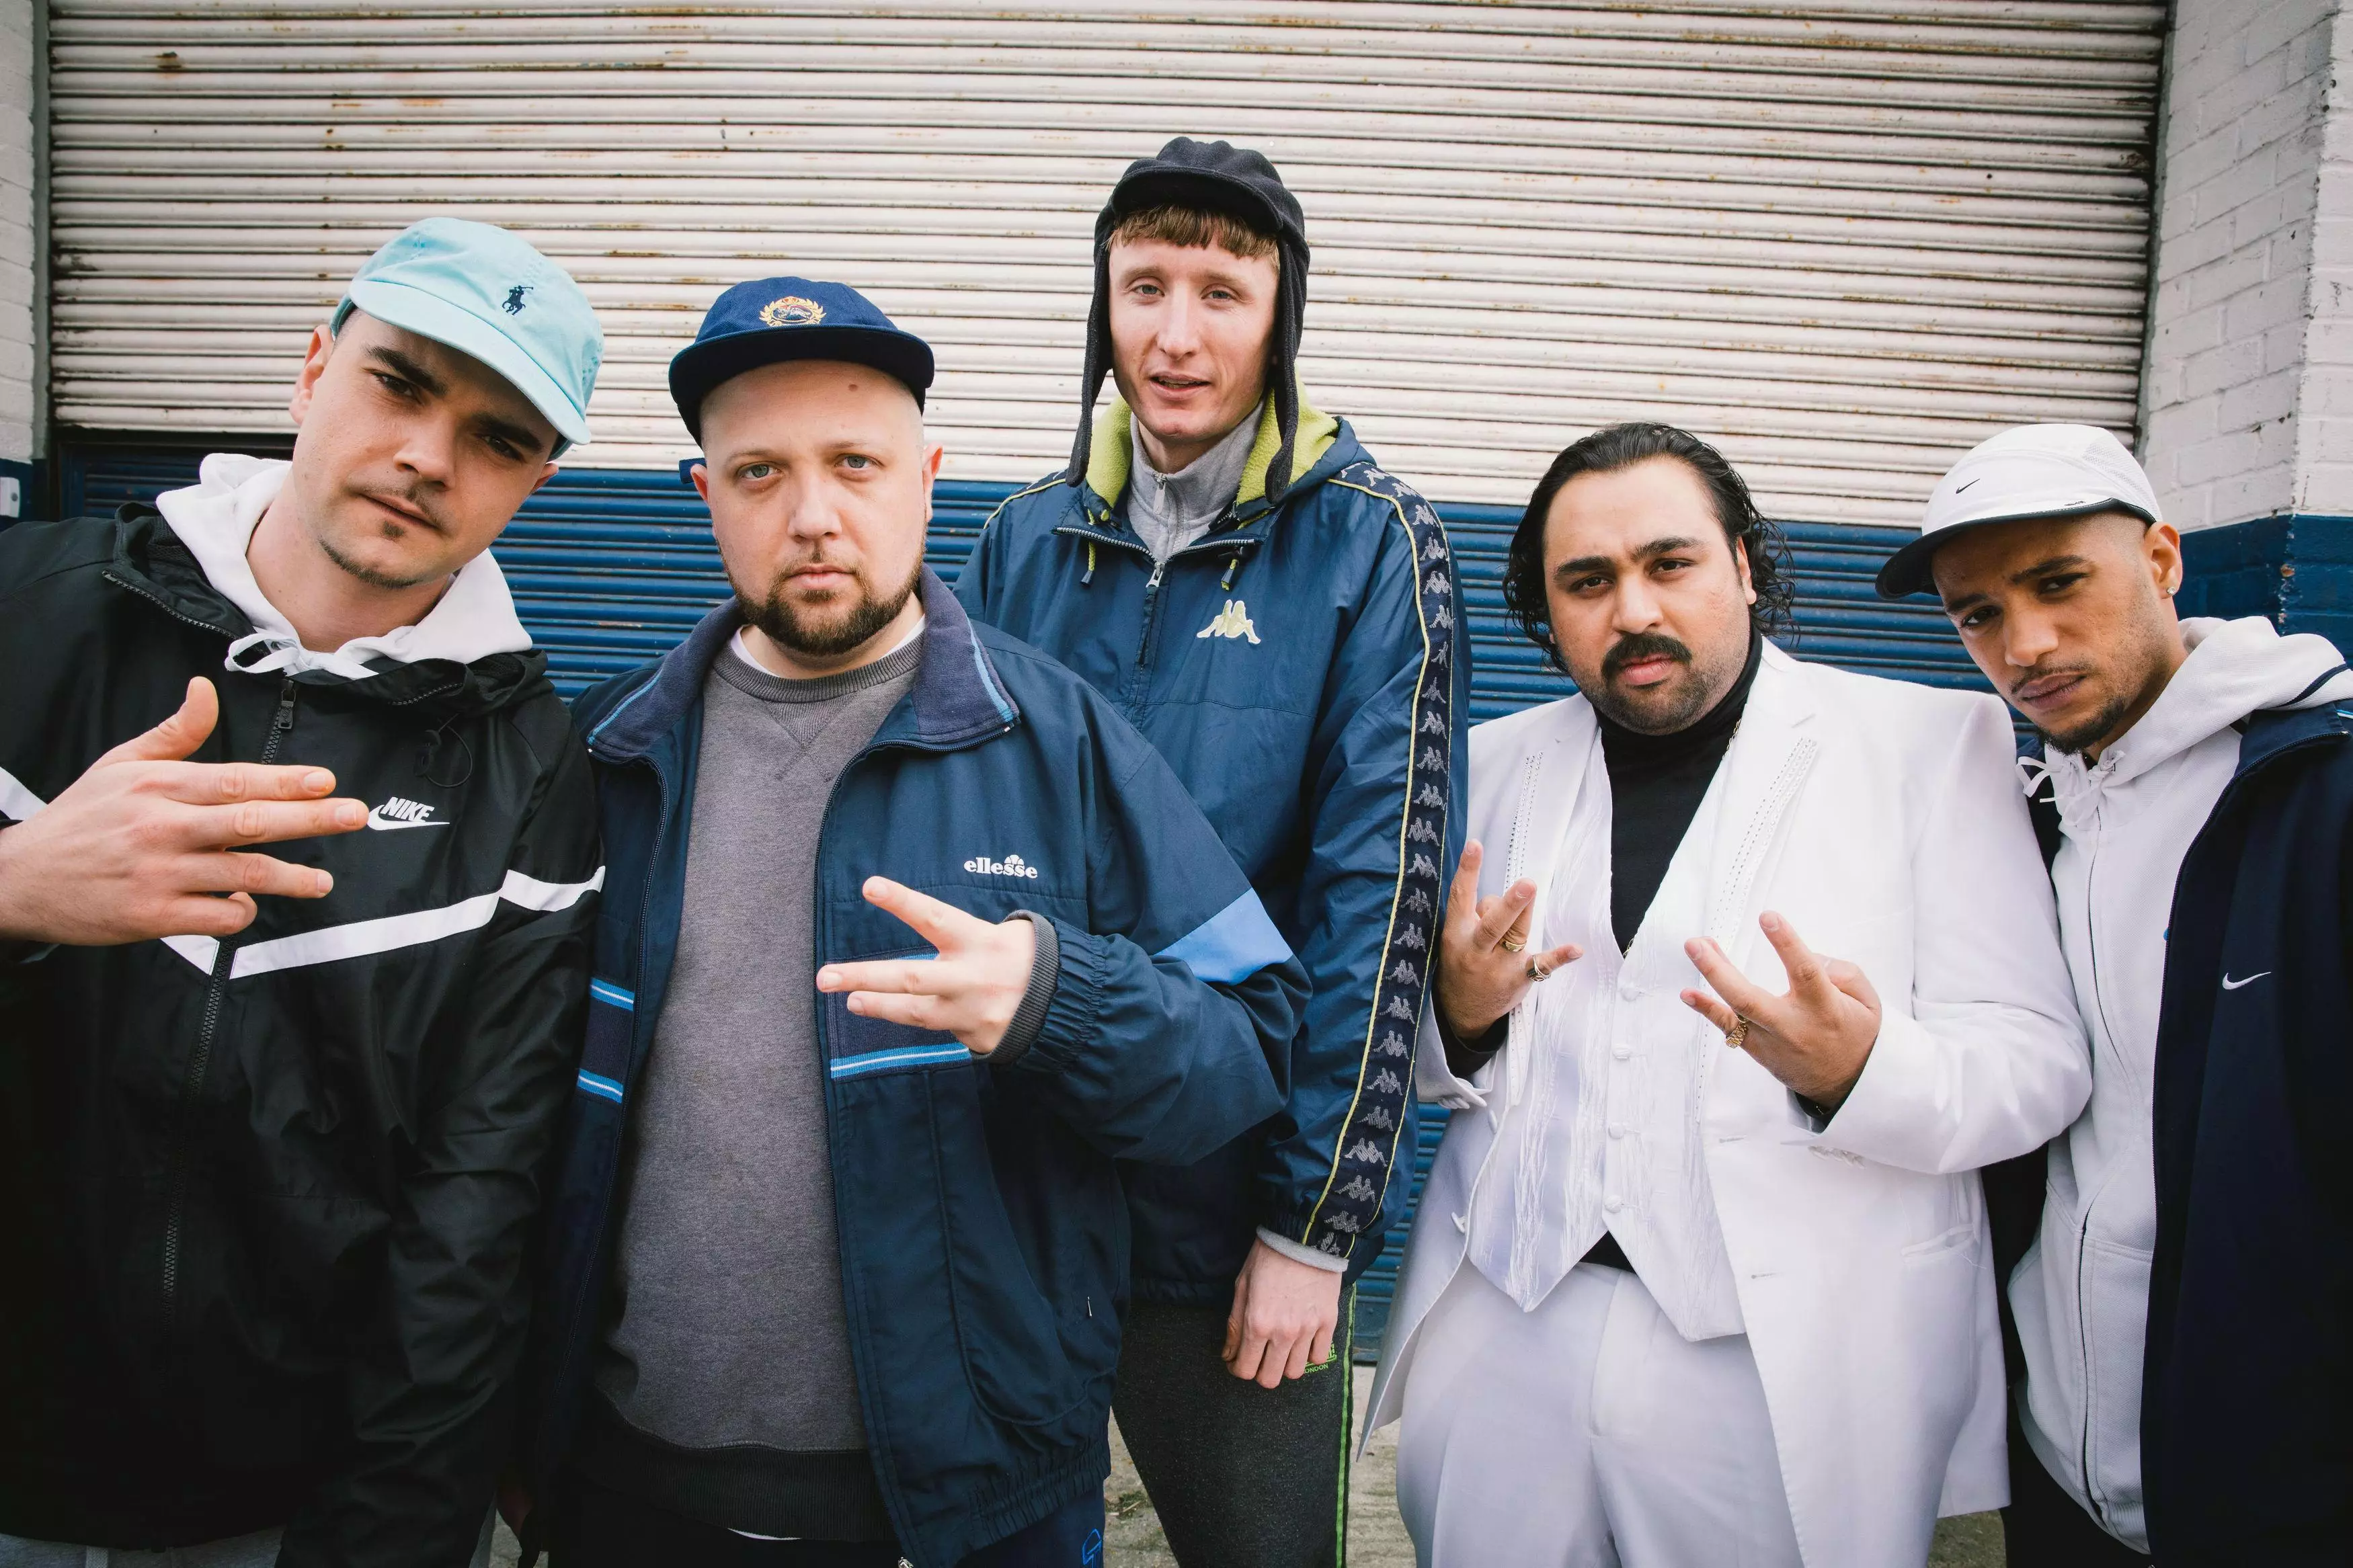 MC Grindah and crew are taking Japan (